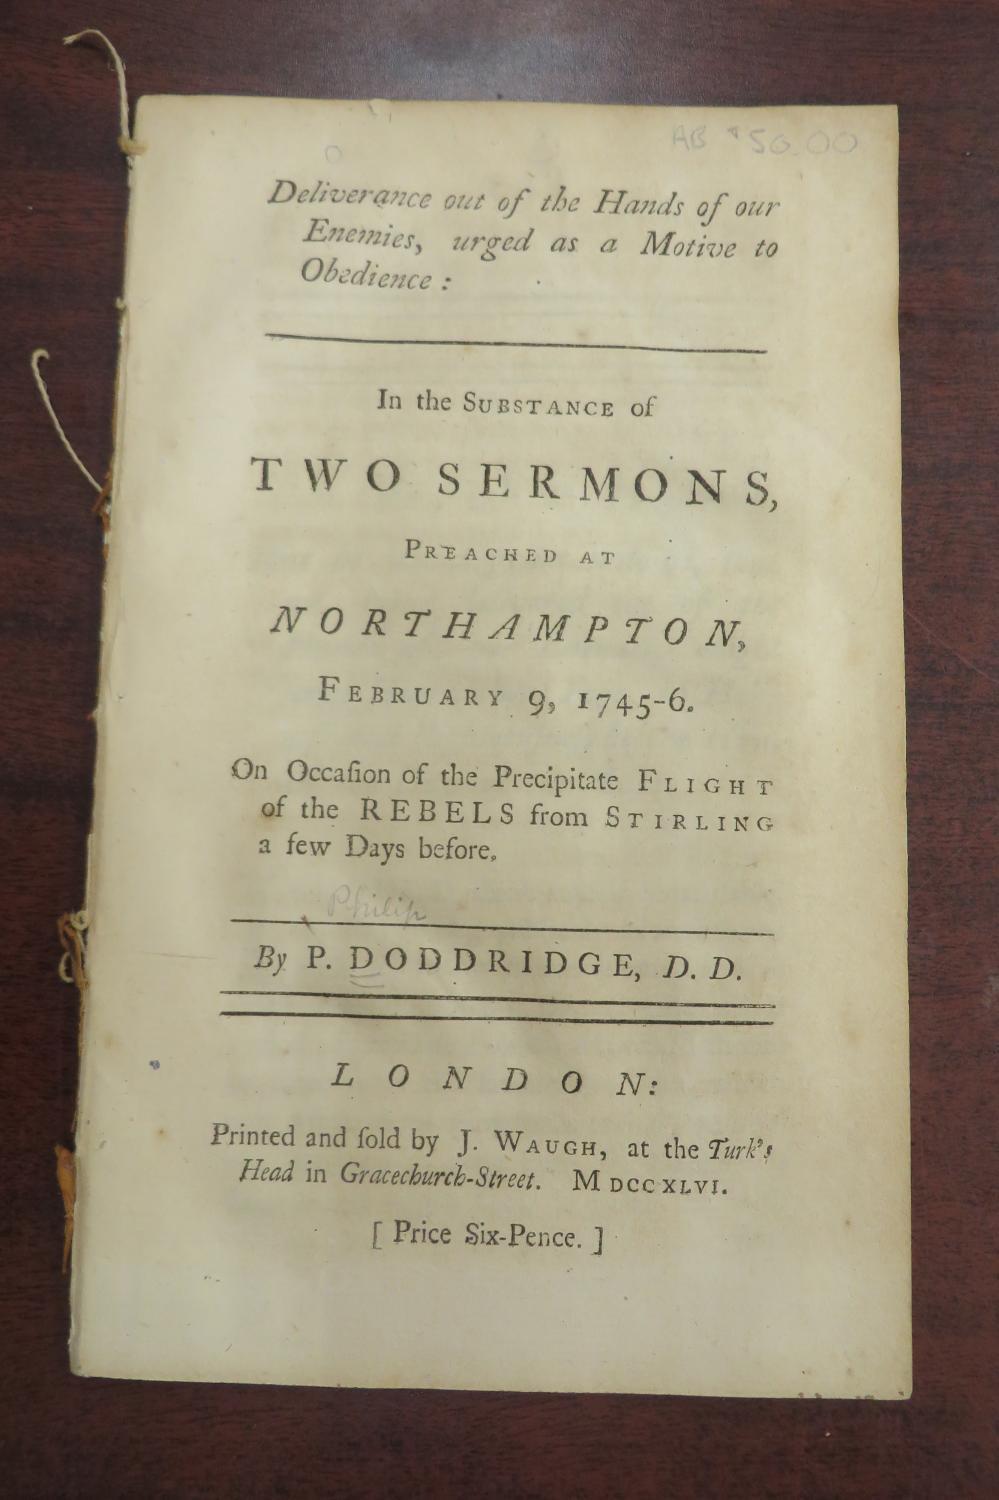 Deliverance out of the Hands of our Enemies, urged as a Motive to Obedience: In the Substance of Two Sermons Preached at Northampton February , 1745-6